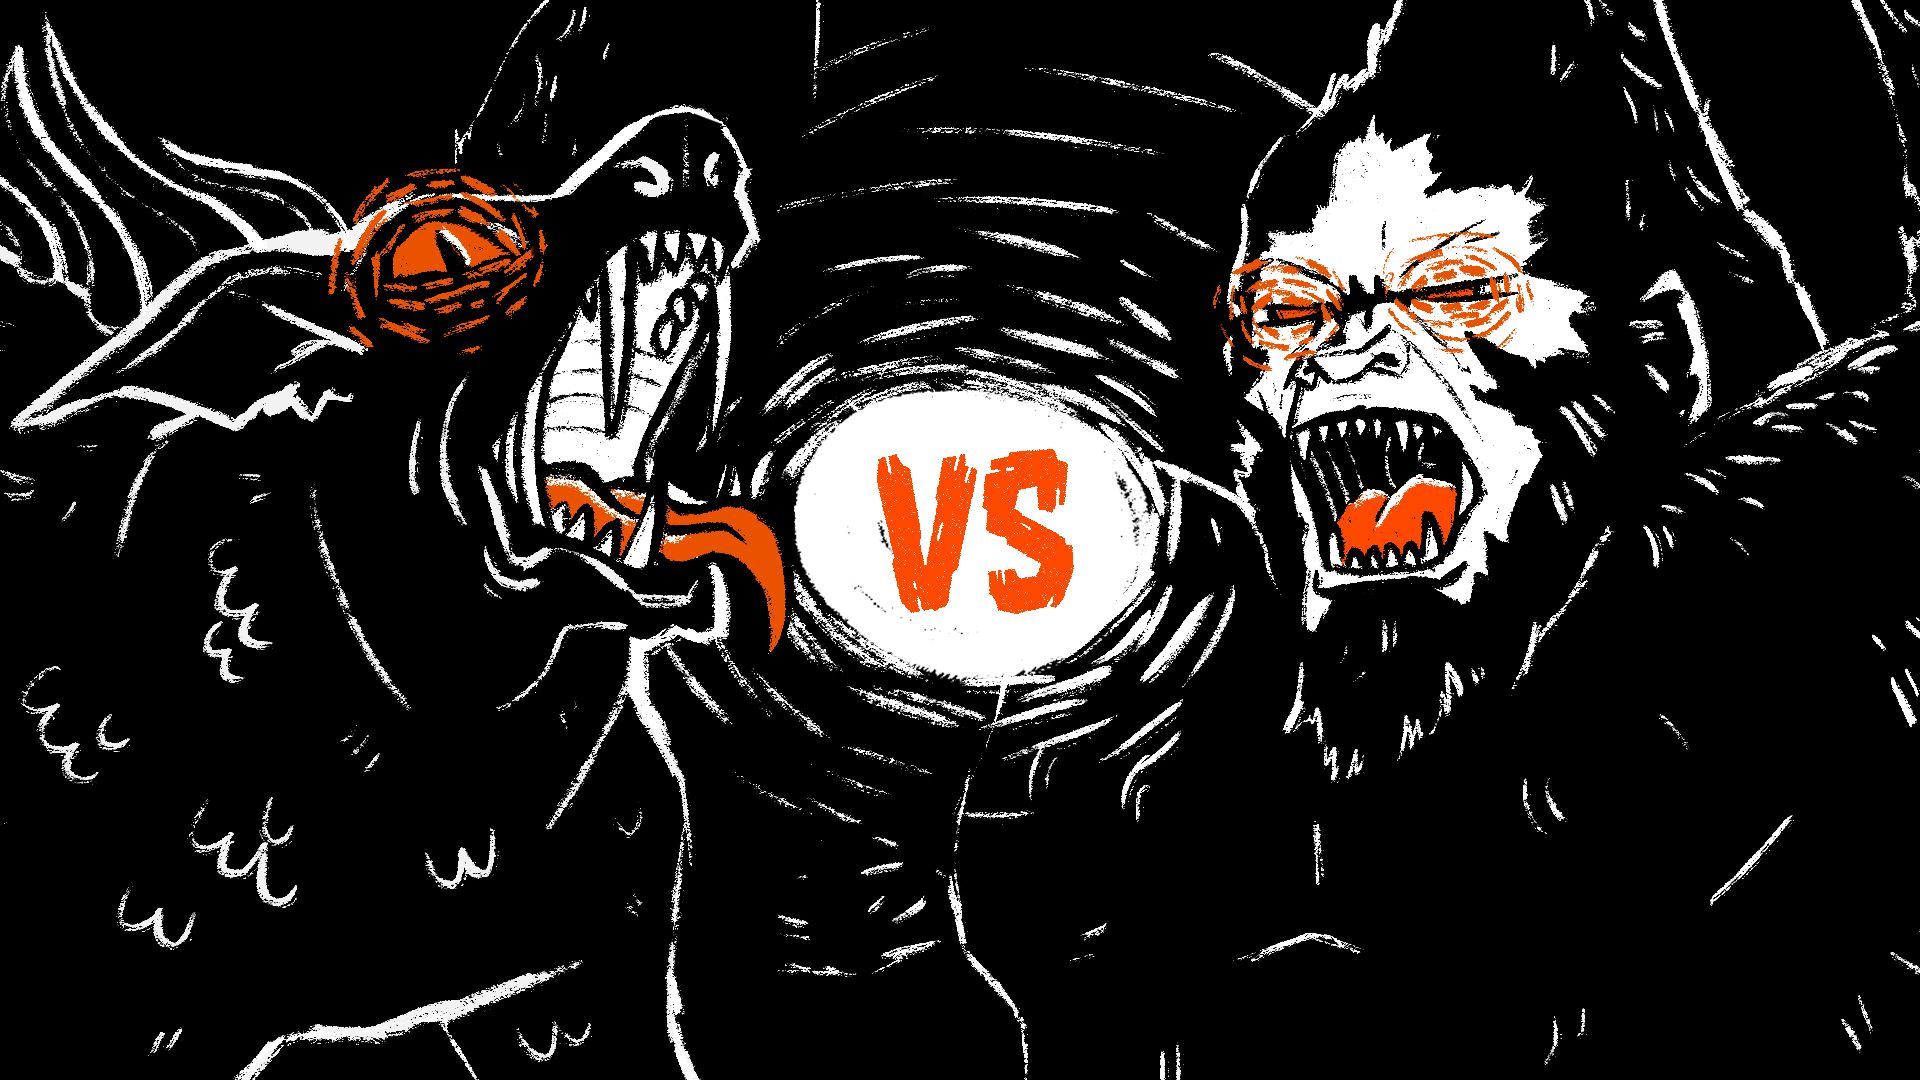 Illustration of Chupacabra and Bigfoot facing off against each other, with "vs." in the middle.